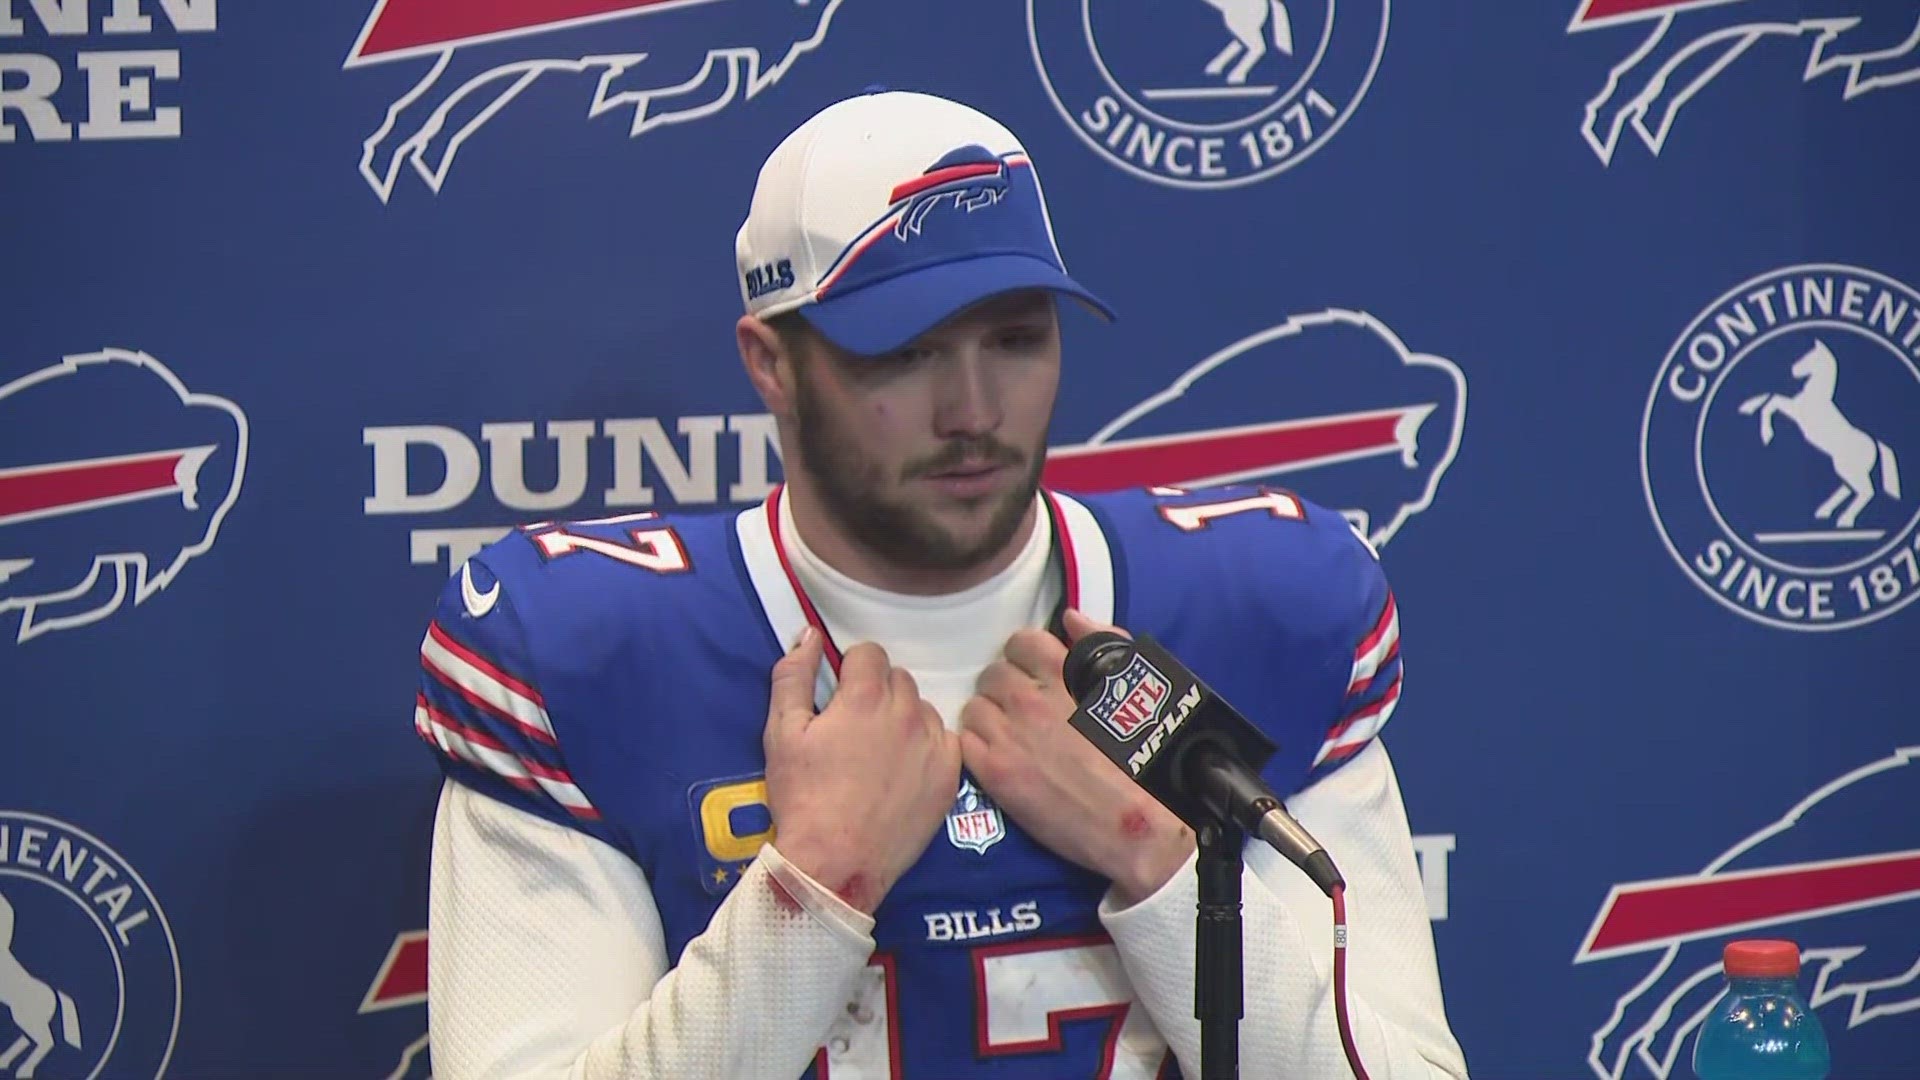 Bills postgame reaction: Josh Allen discusses the 27-24 Bills loss to the Kansas City Chiefs in an AFC divisional round playoff game.